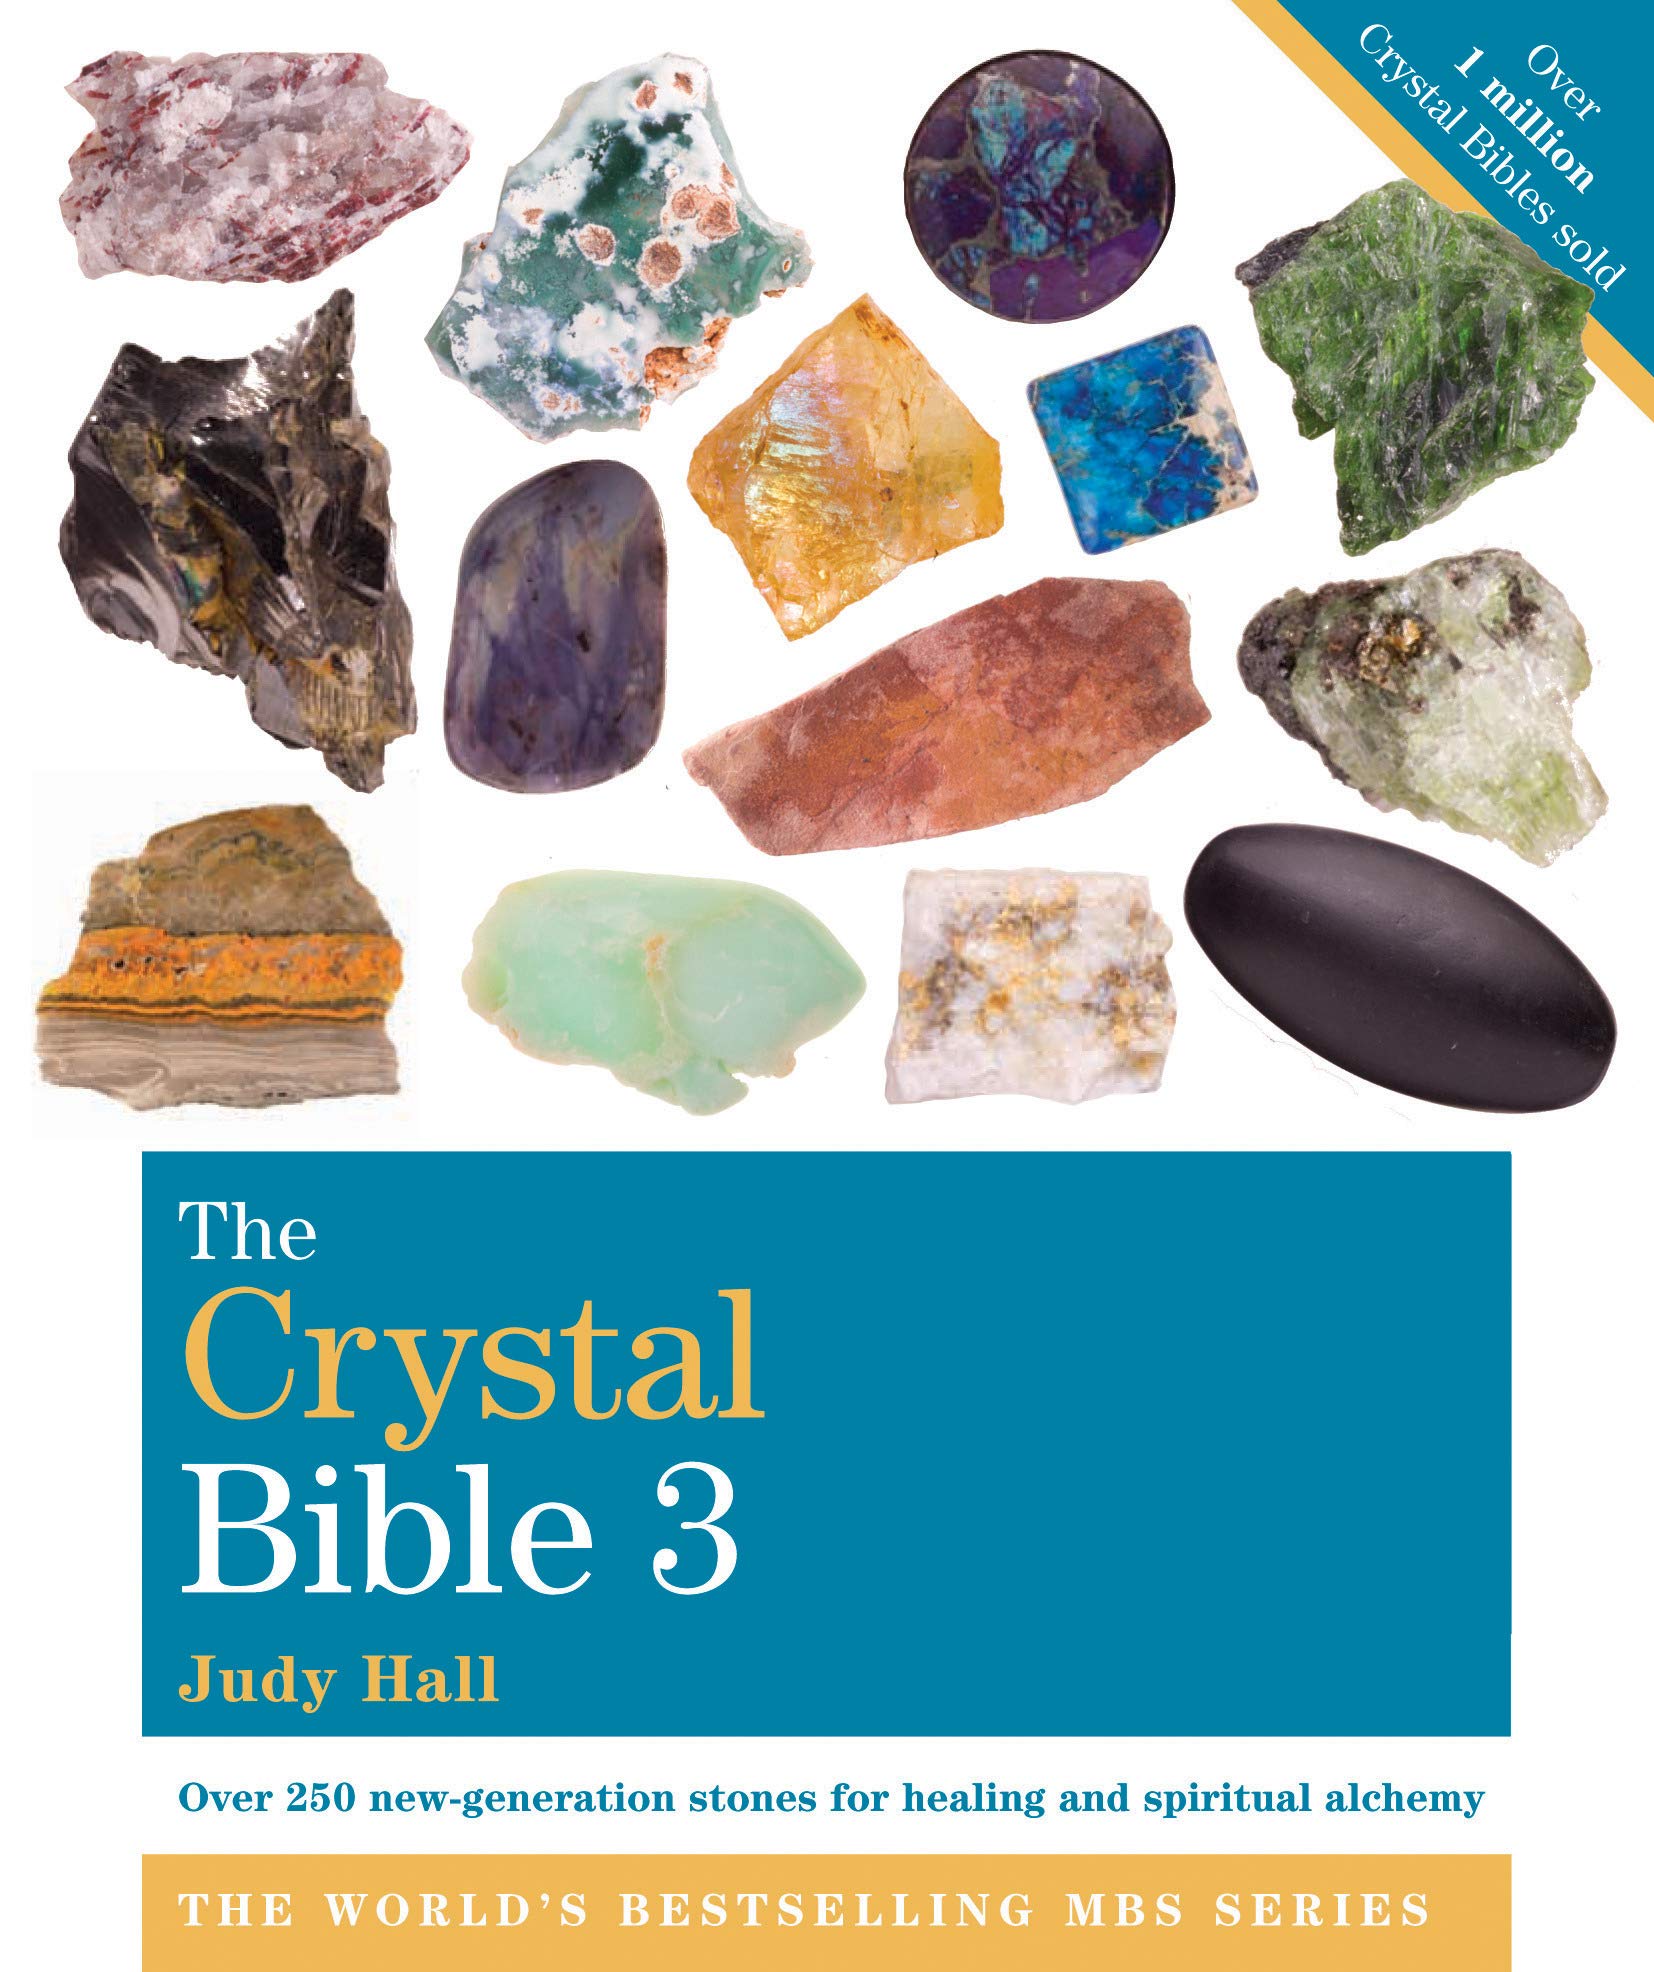 The Crystal Bible 3 || Judy Hall (Paperback)